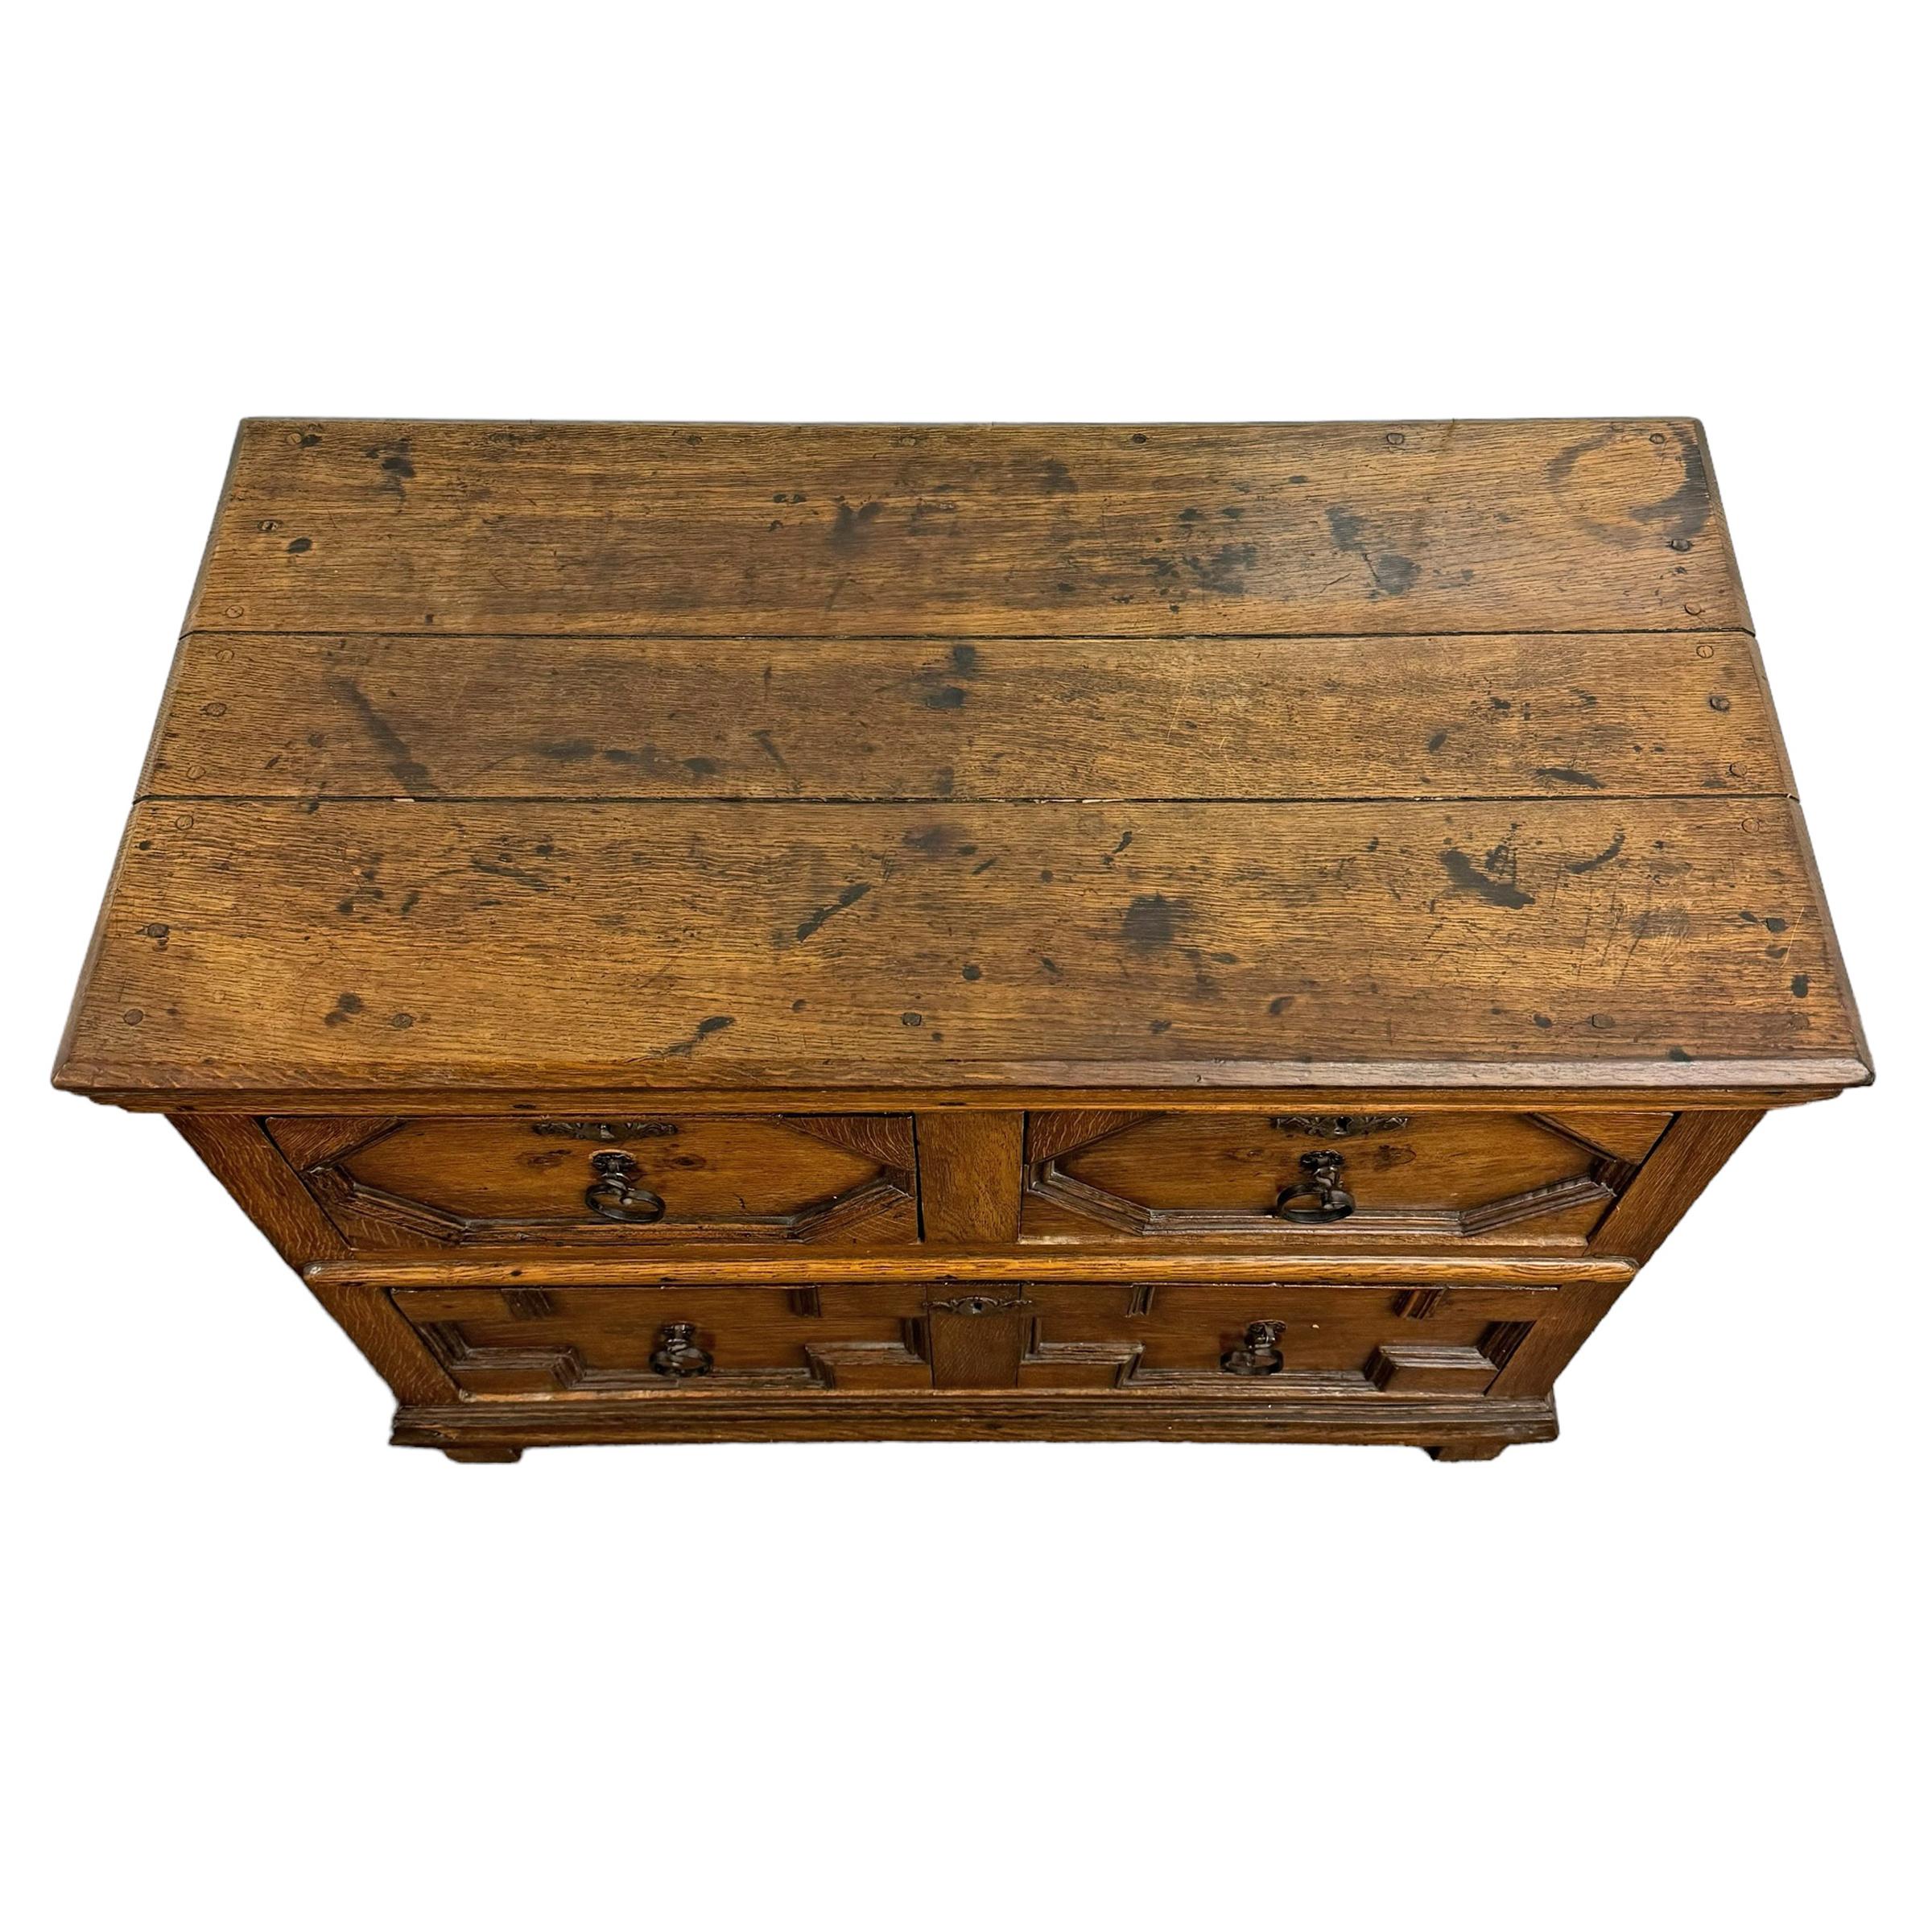 Oak Early 18th Century English William and Mary Chest of Drawers For Sale